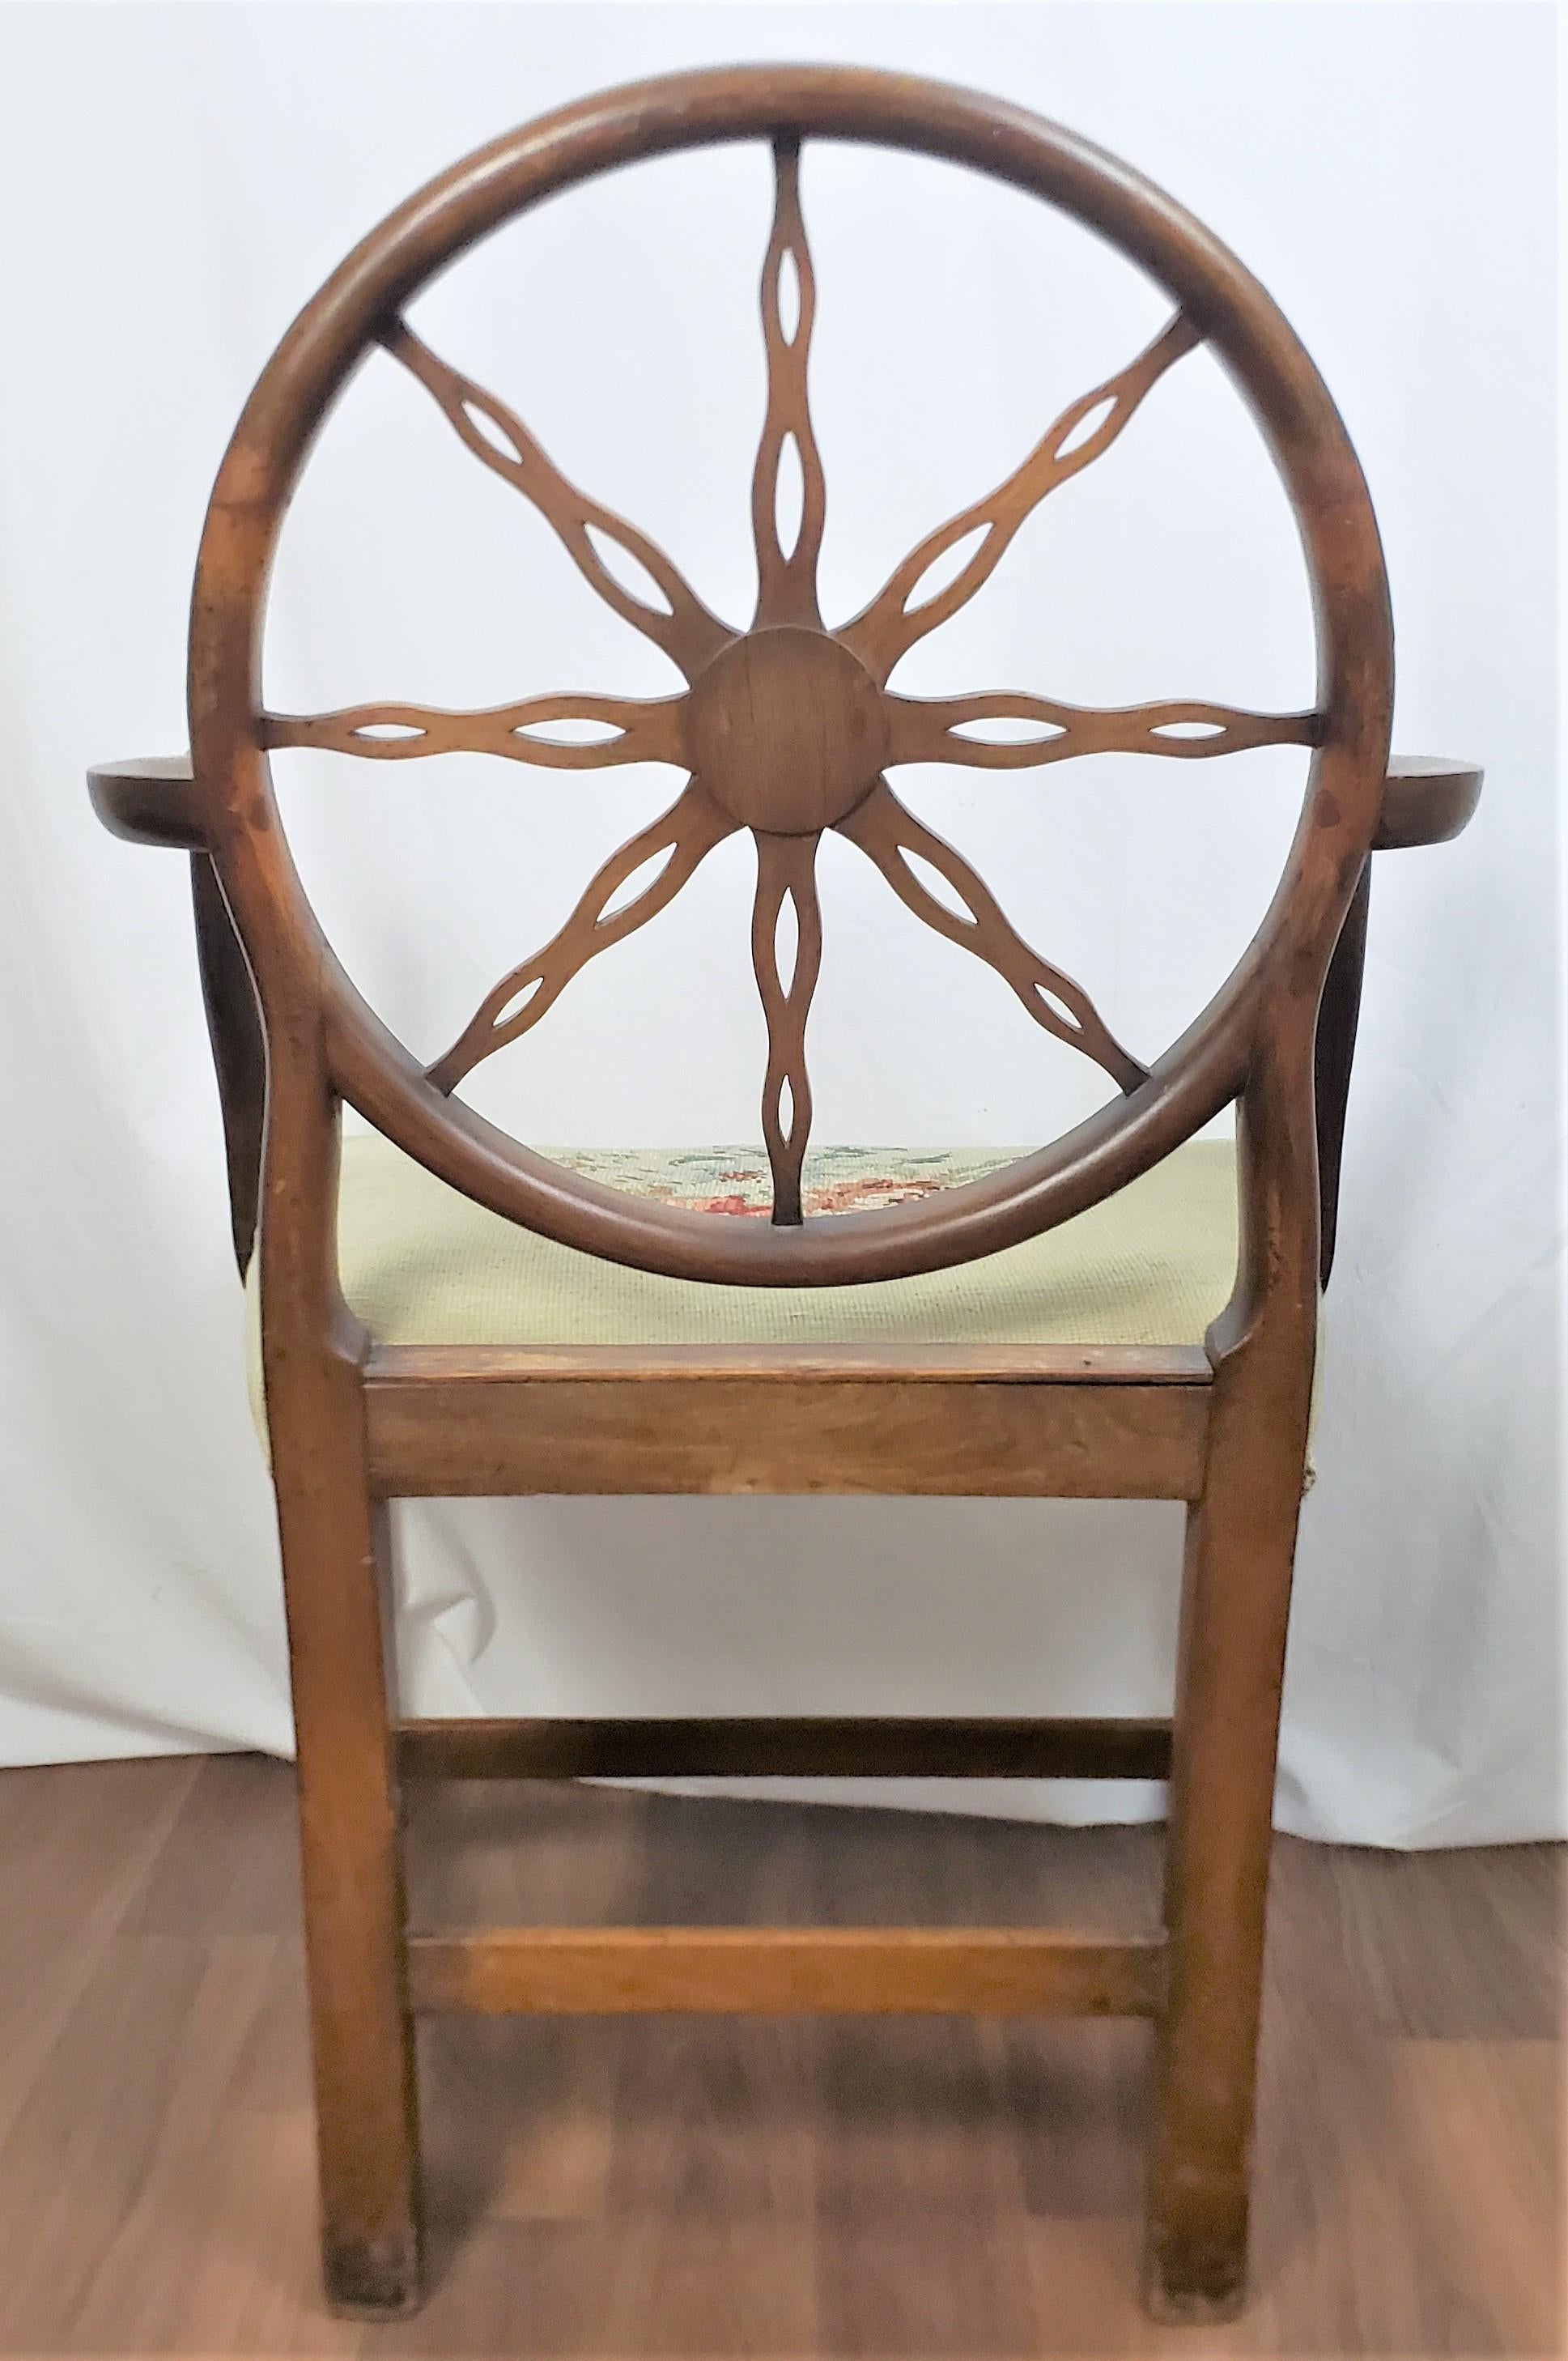 Antique King George III Period Wheelback Armchair or Side Chair Frame In Good Condition For Sale In Hamilton, Ontario